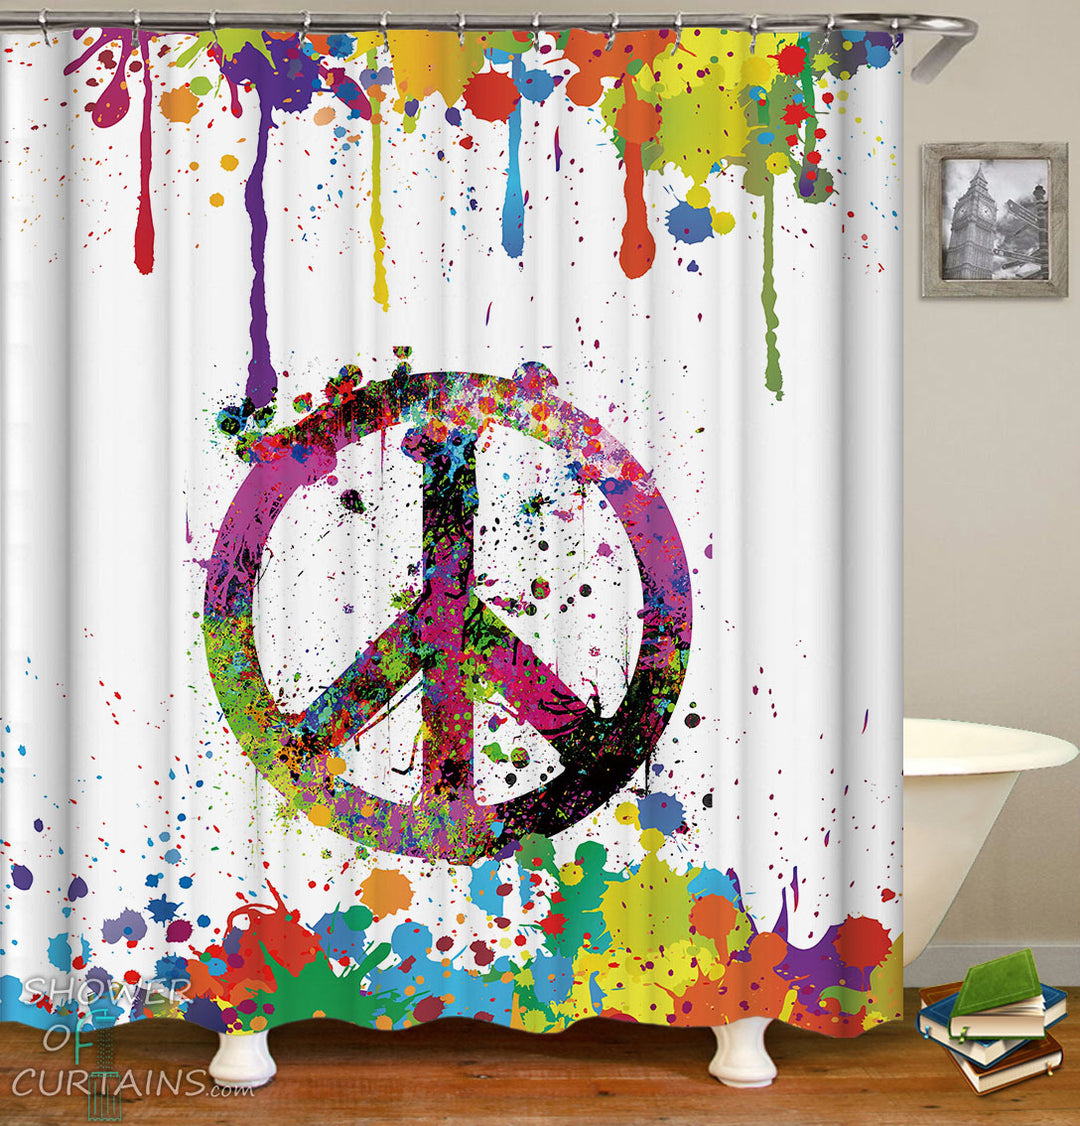 Riot Of Colors Peace Shower Curtain - Colorful Bathroom Decor